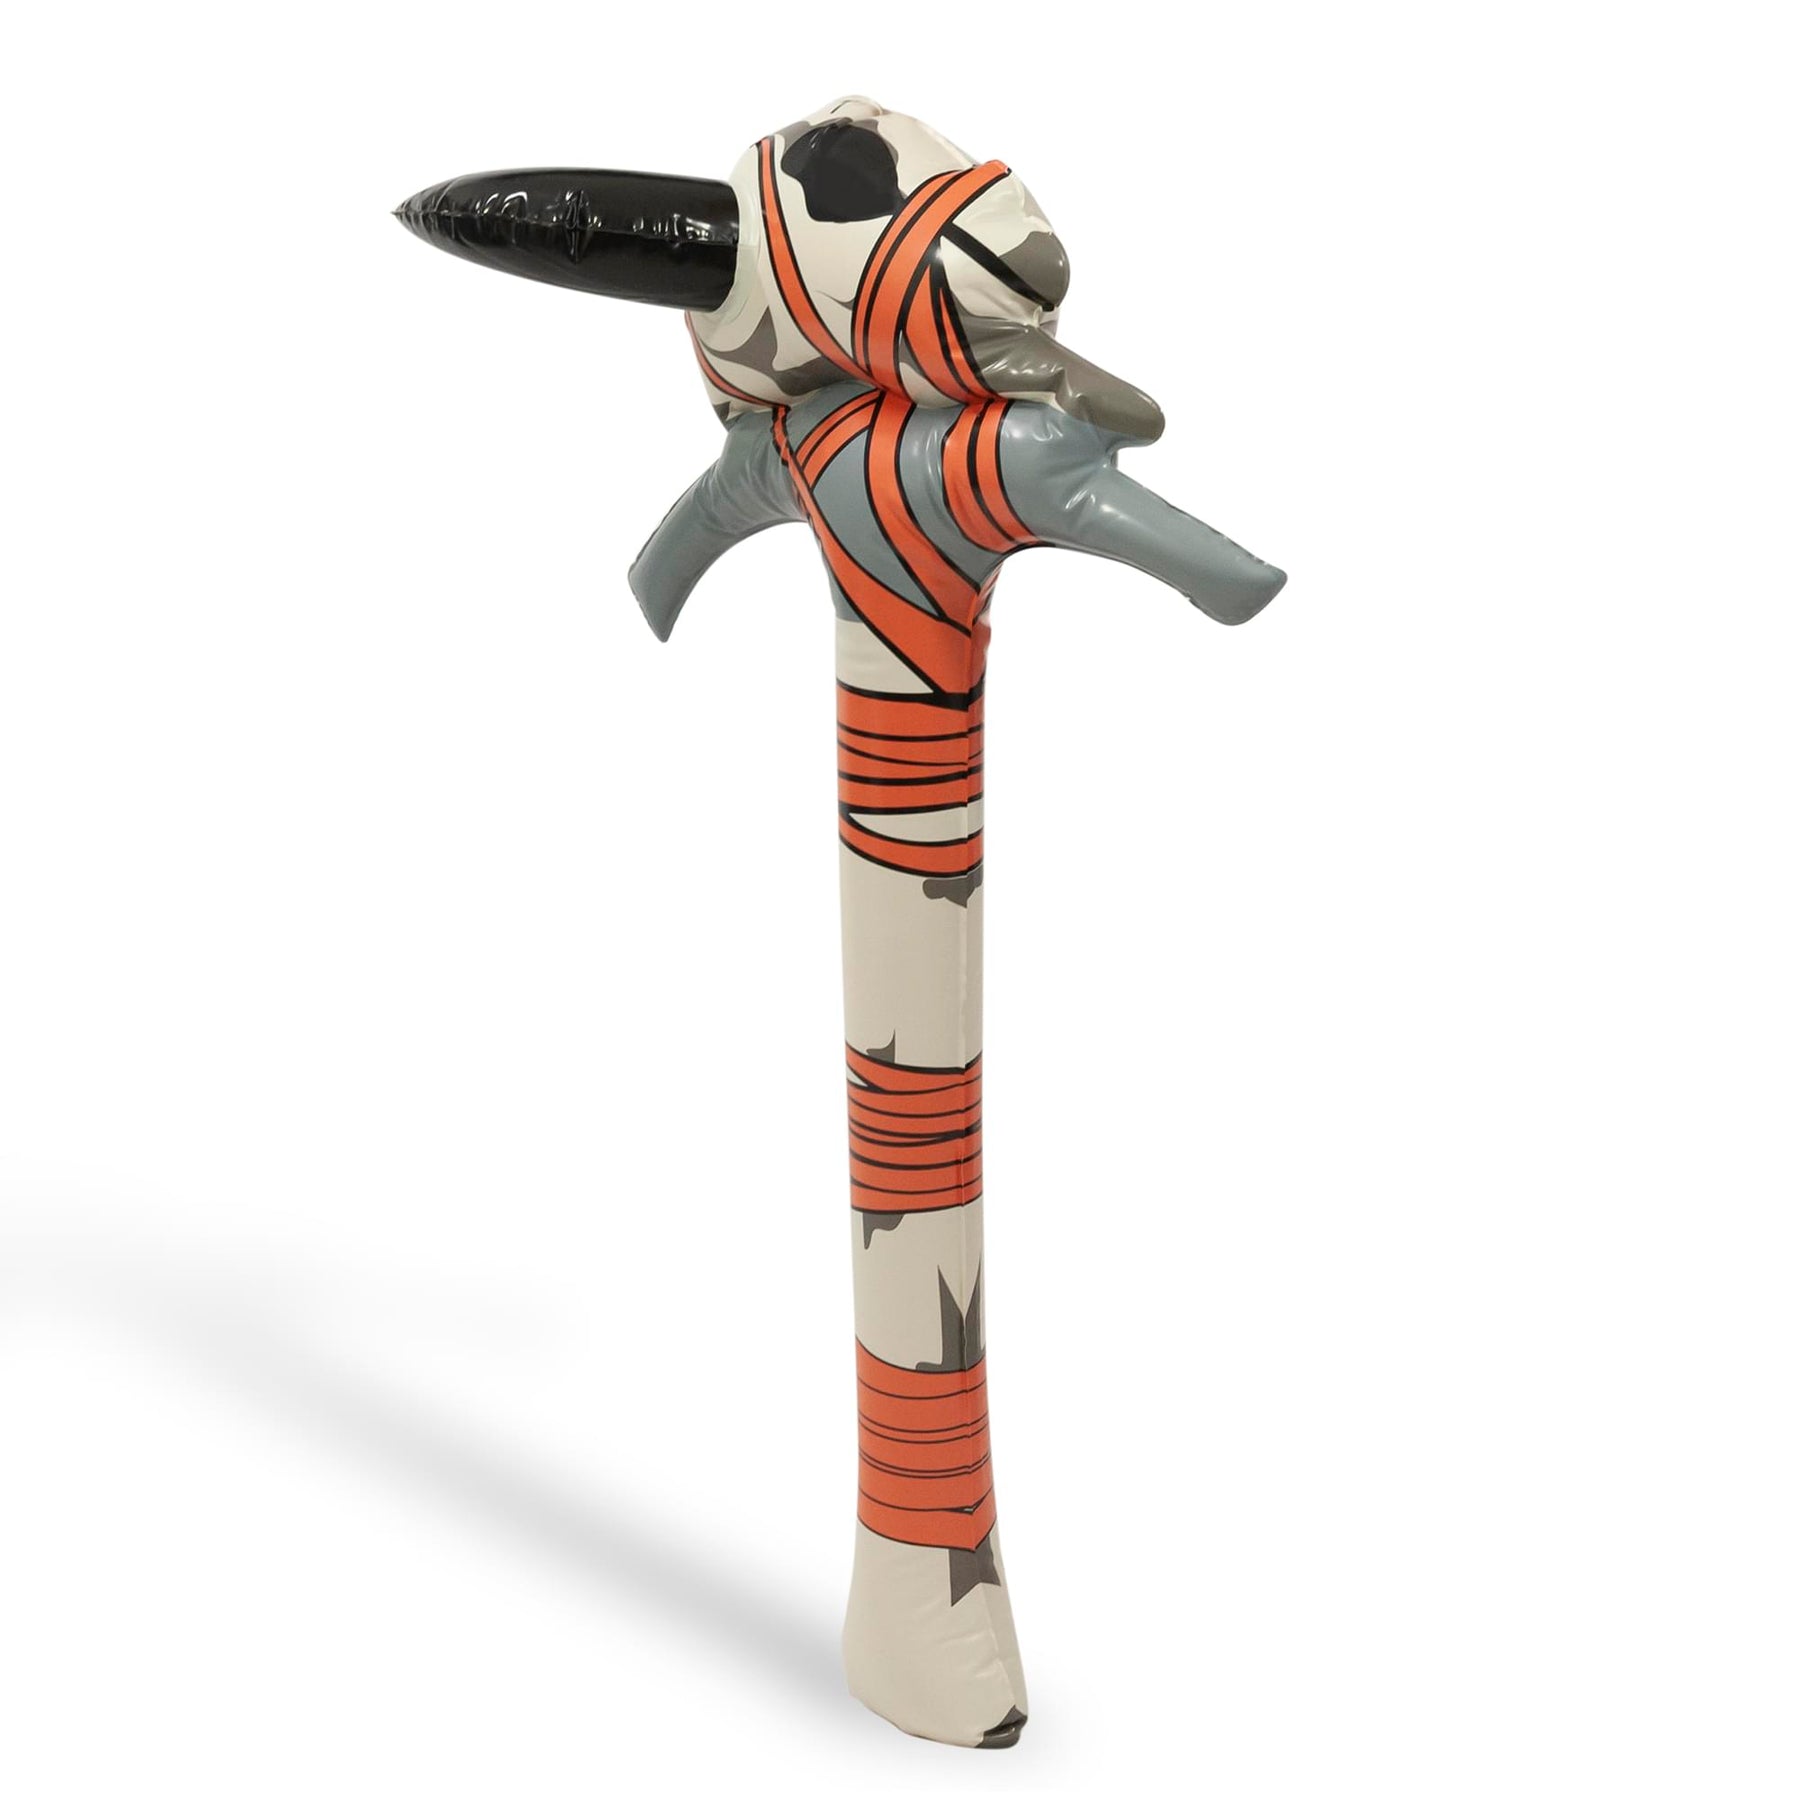 Fortnite Death Valley Skin Inflatable Pickaxe Costume Accessory